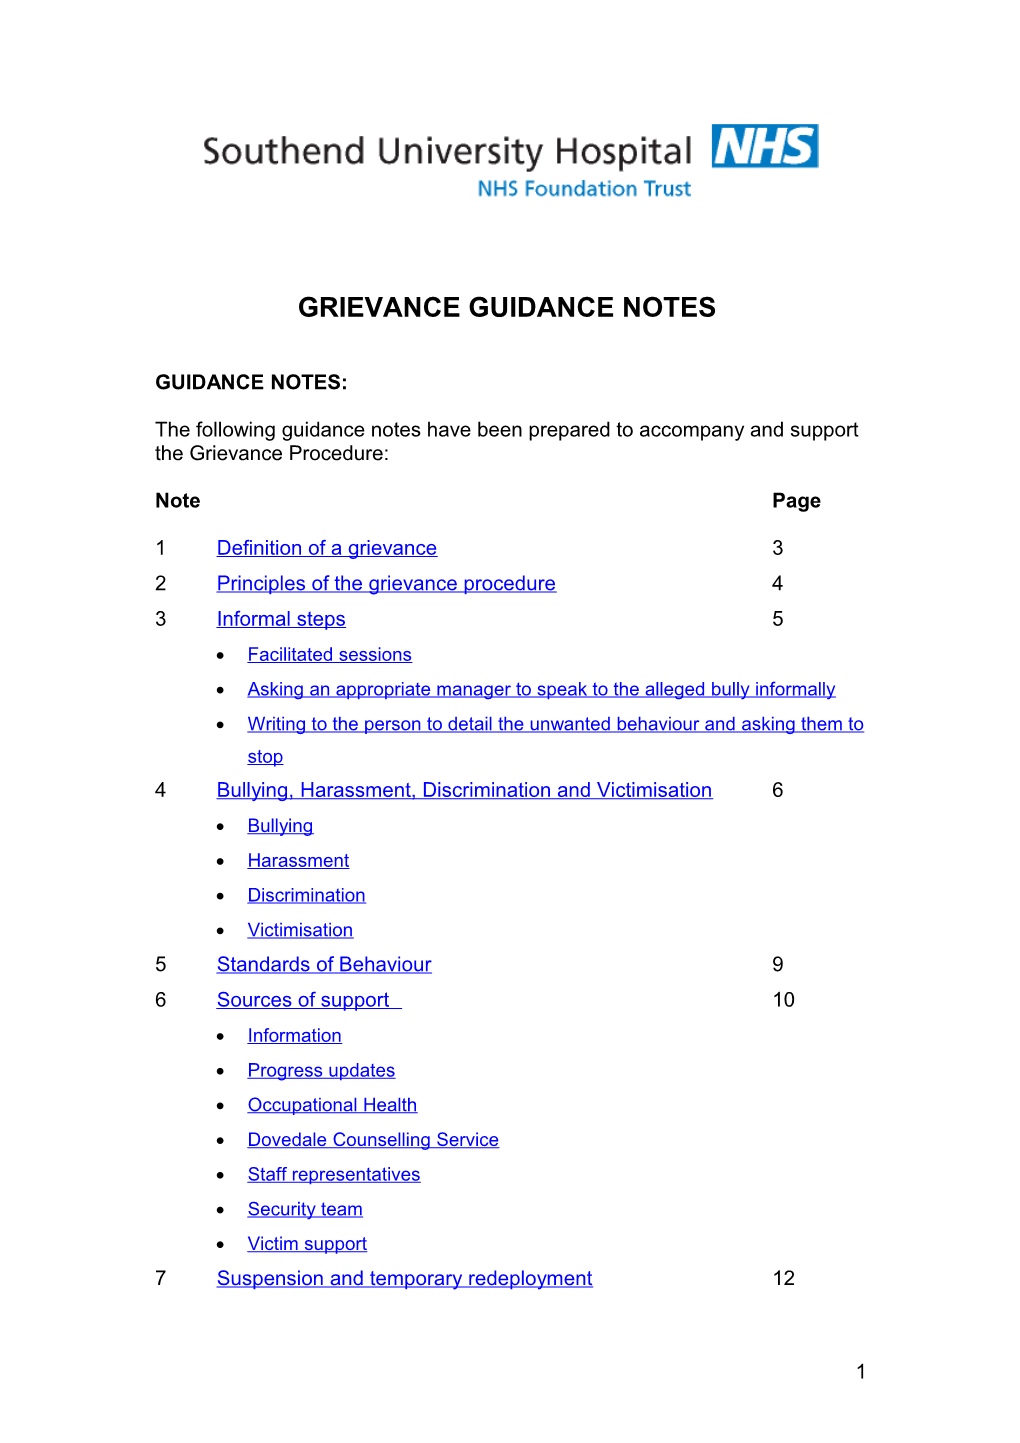 PP29 T2 Grievance Guidance Notes